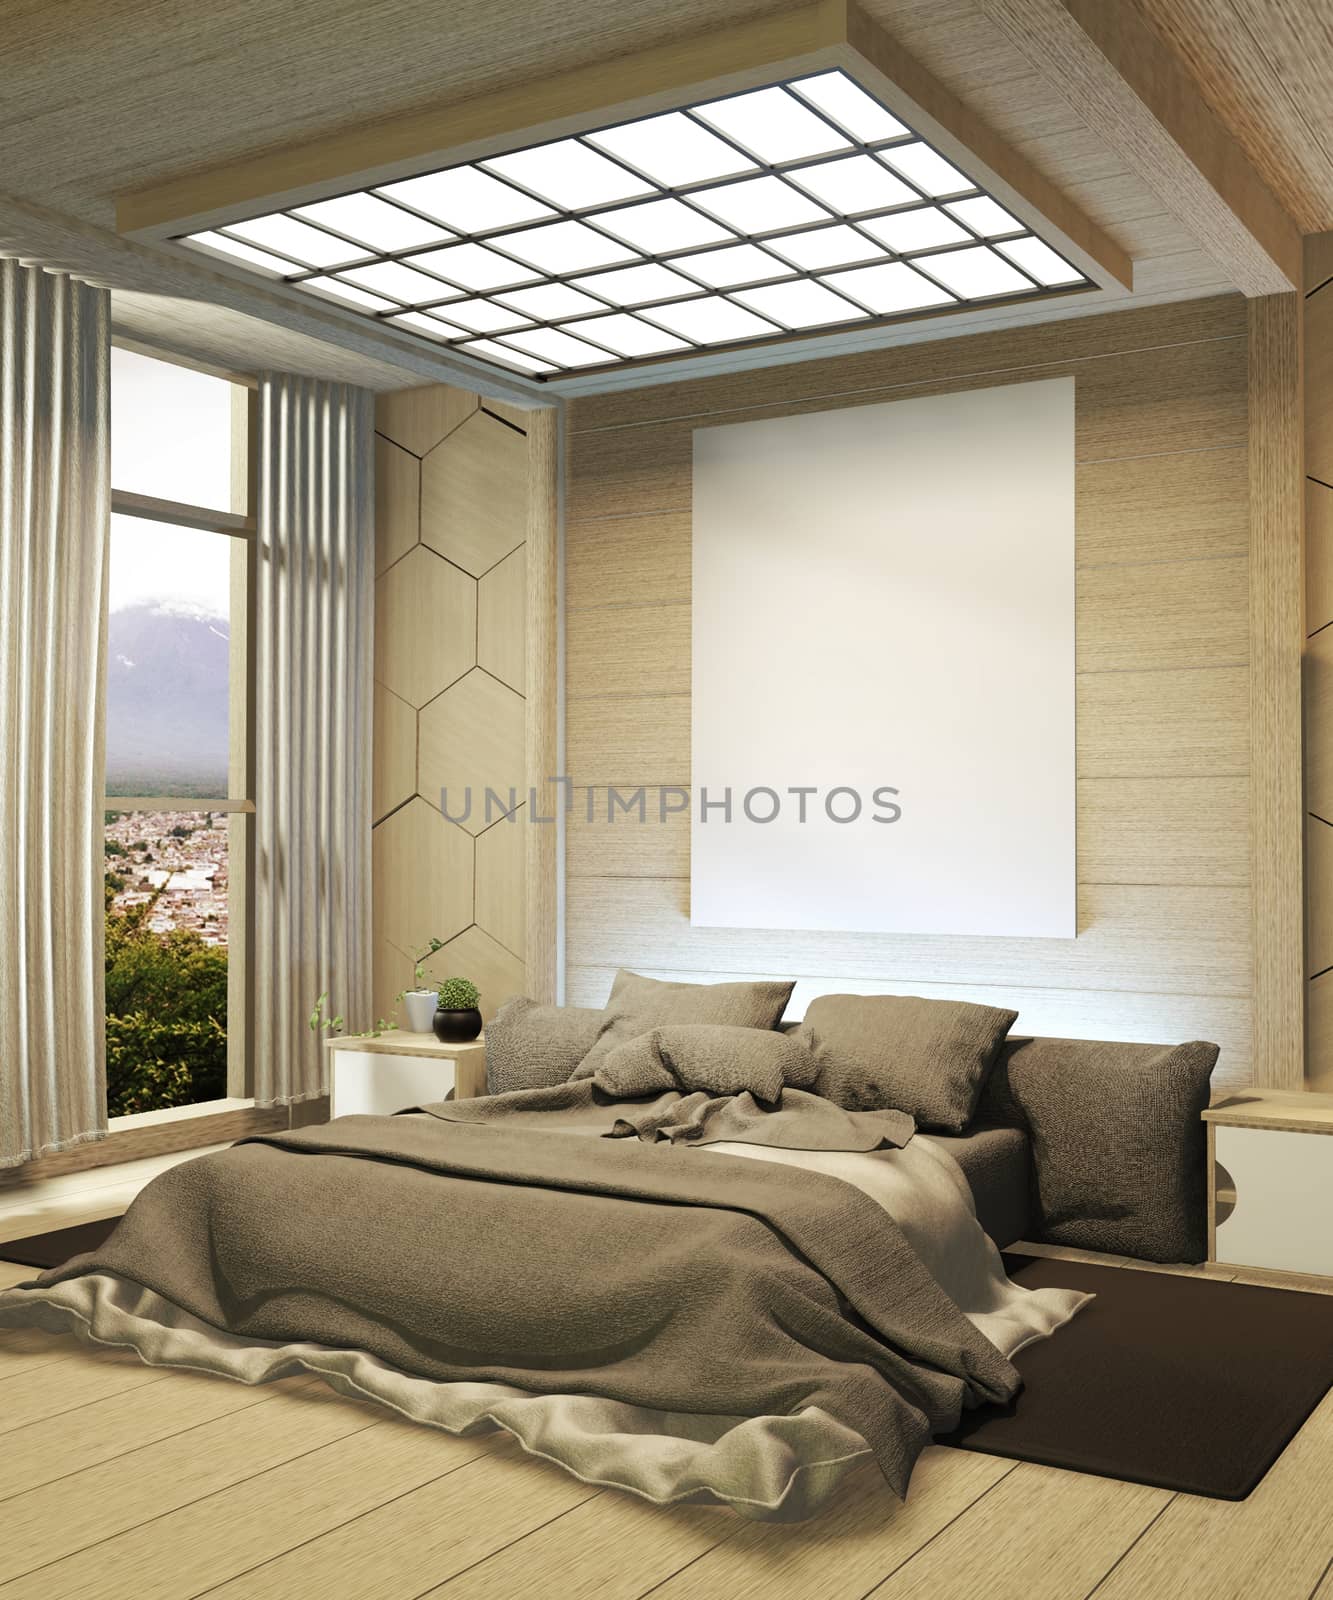 The modern bedroom is luxurious, Japanese style and looks at Mount Fuji in the window and can be edited with a view. 3D rendering